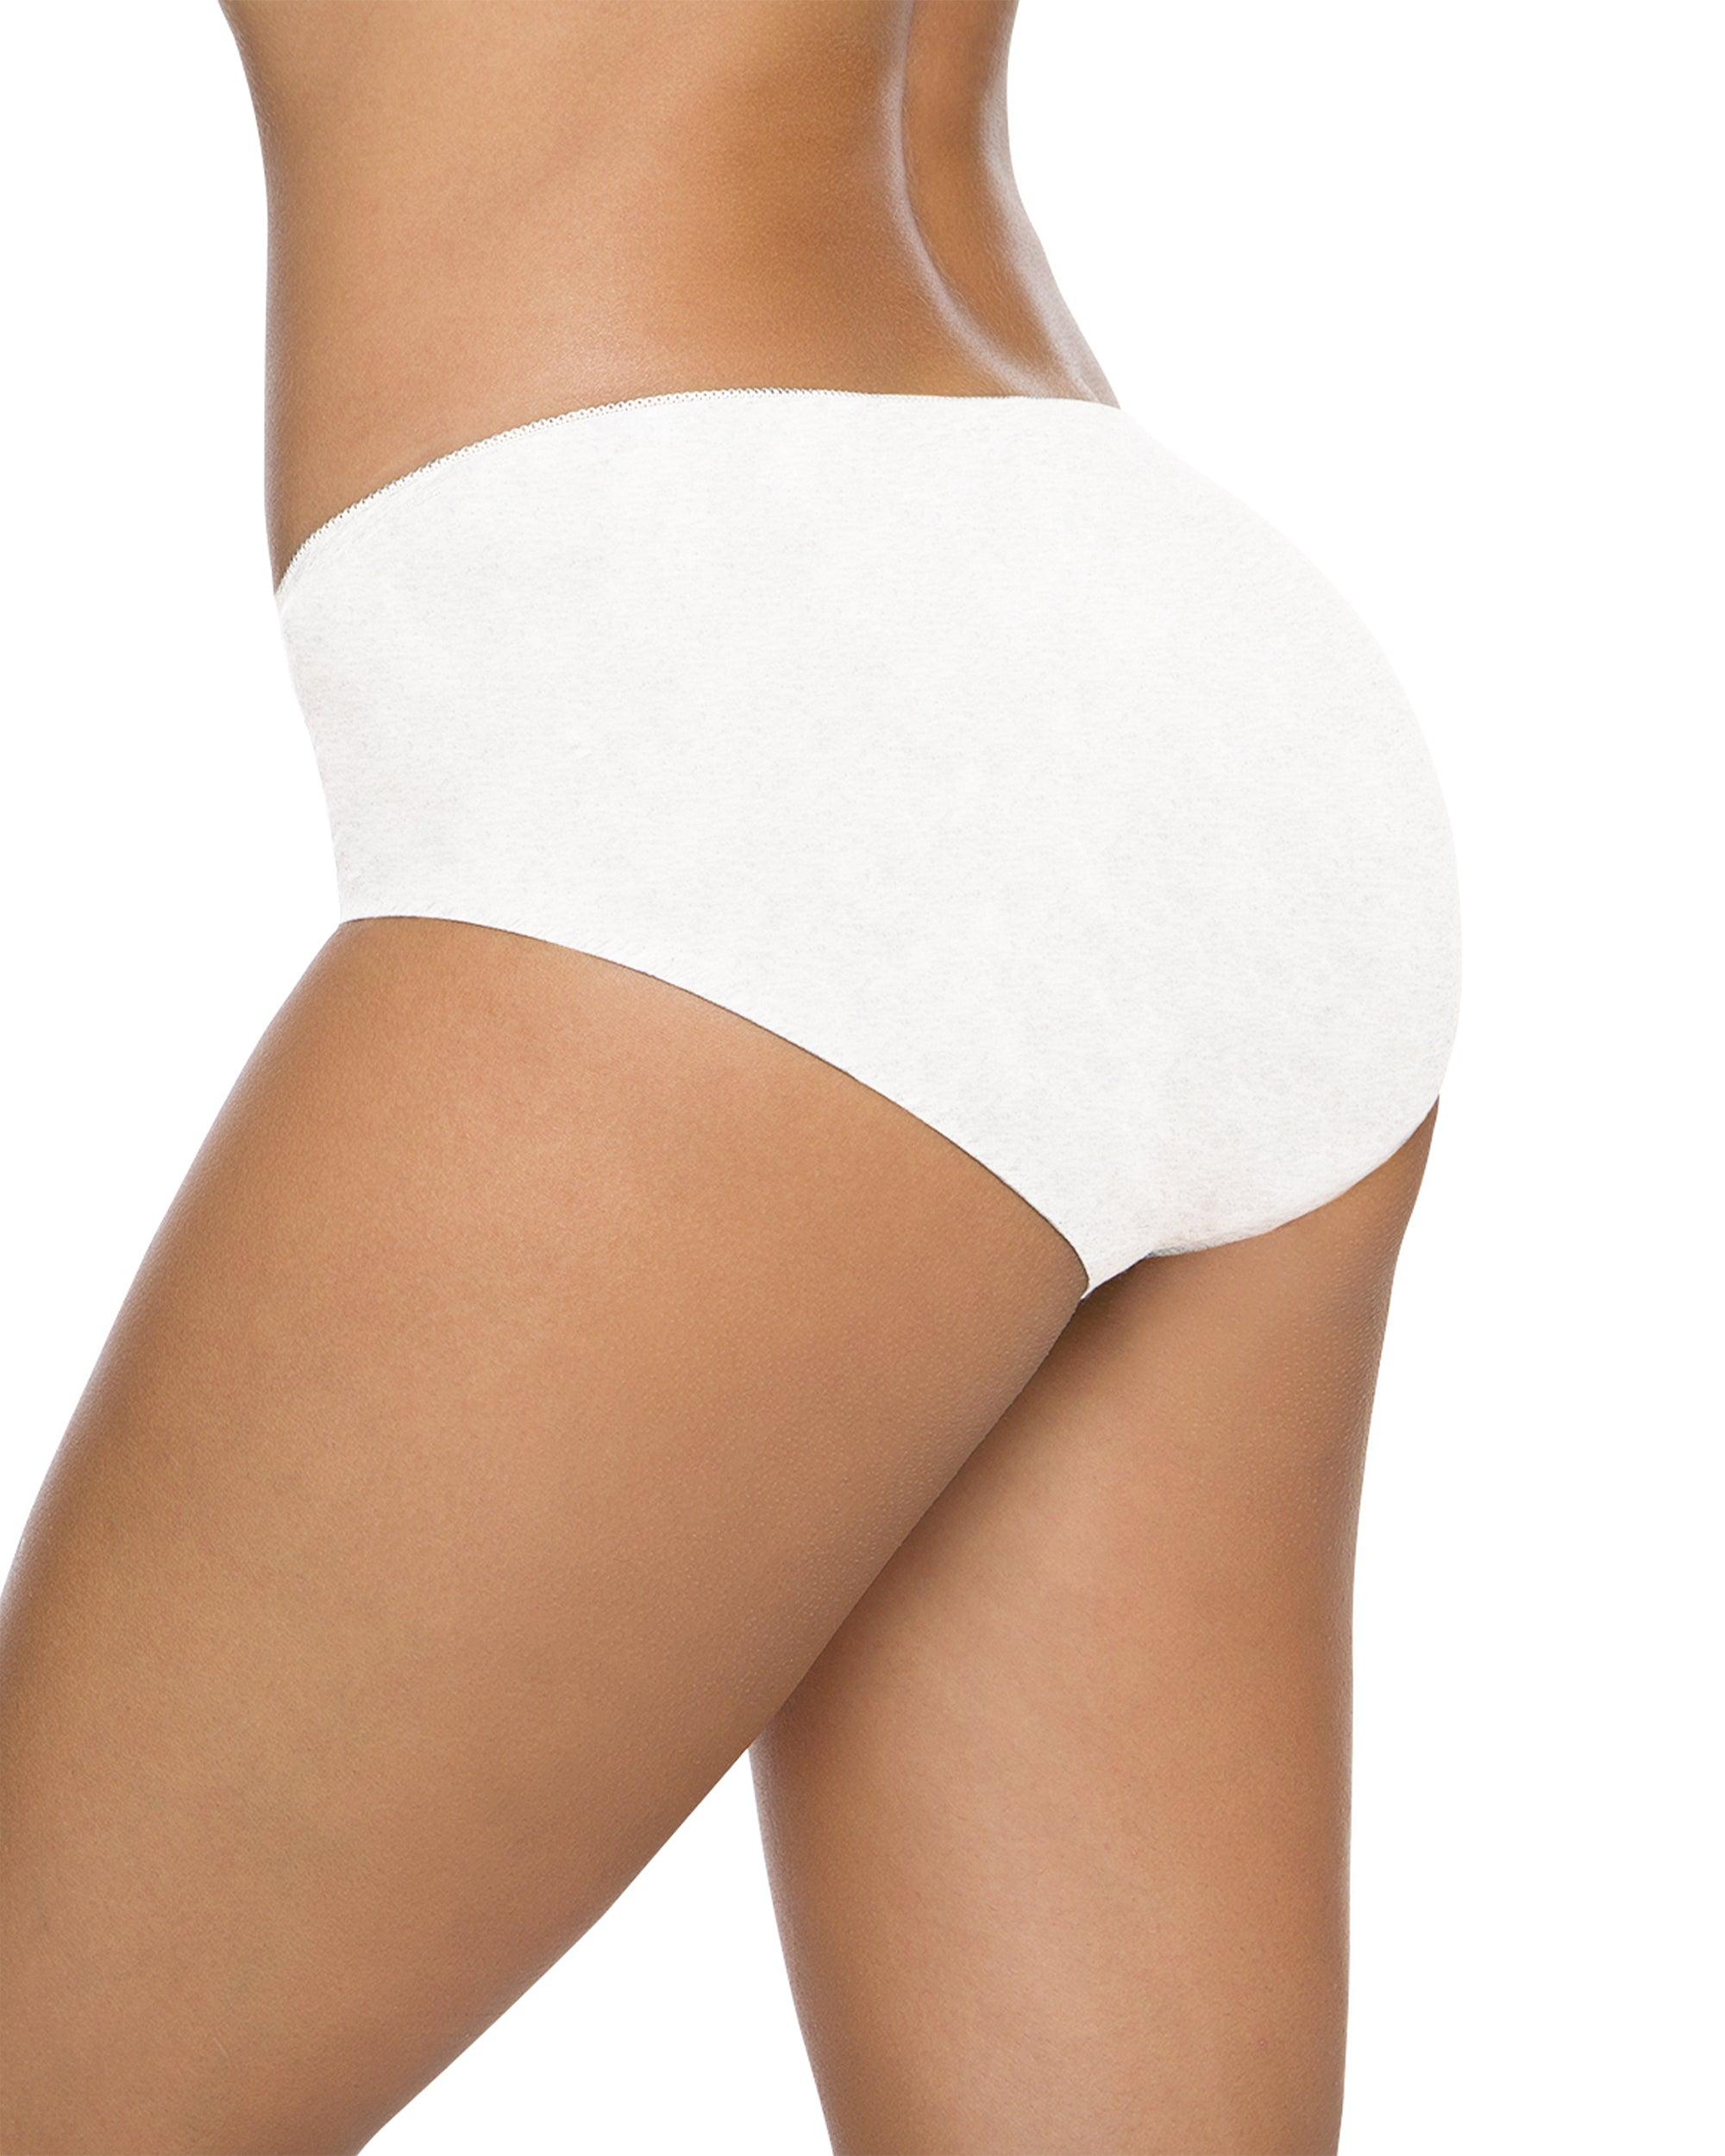 Womens Seamless Cotton Briefs 6 Pieces Pack - ALTHEANRAY